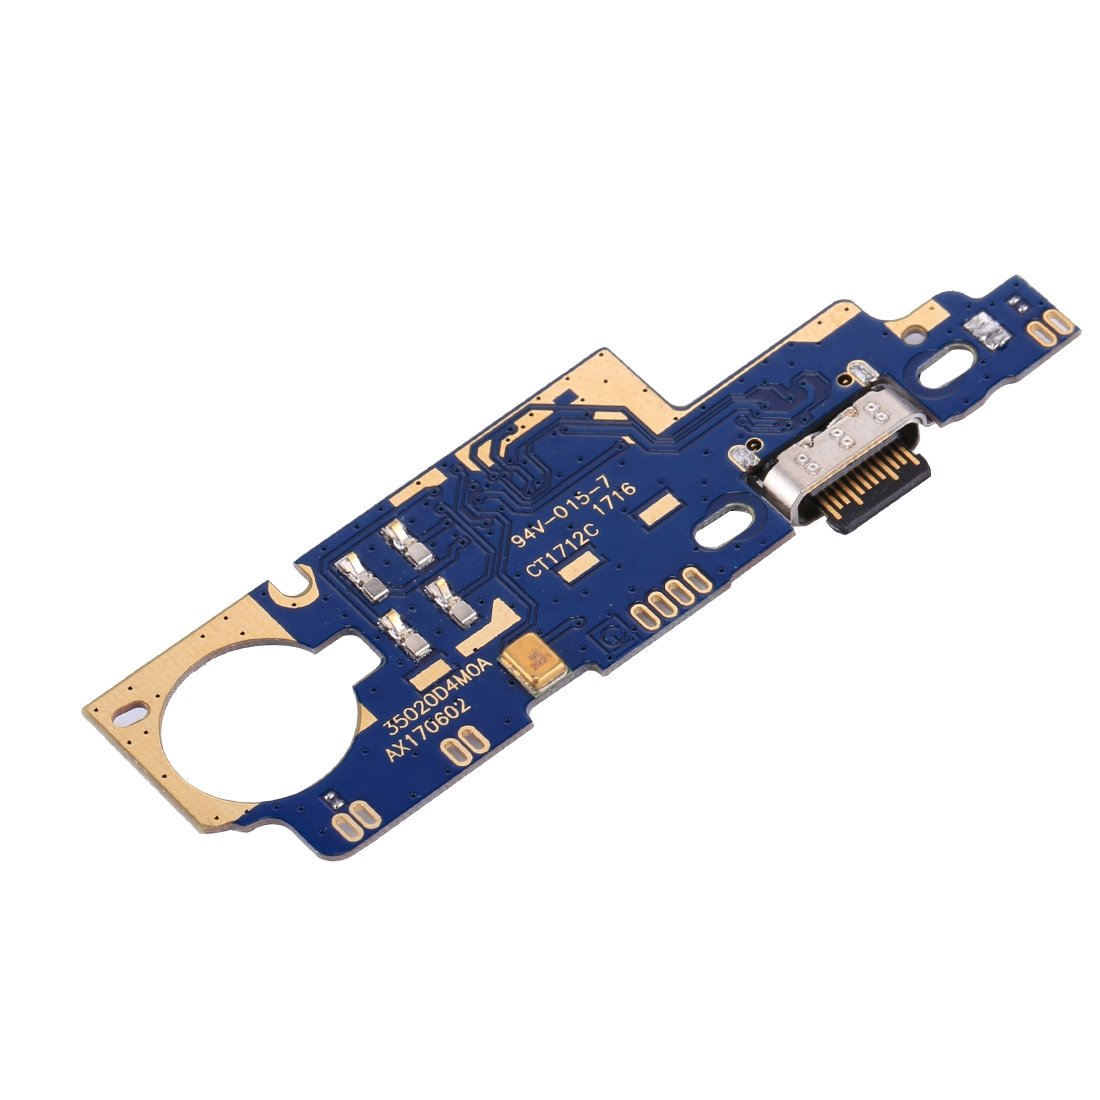 Xiaomi Mi Max 2 Charging Port Board With Microphone for [product_price] - First Help Tech